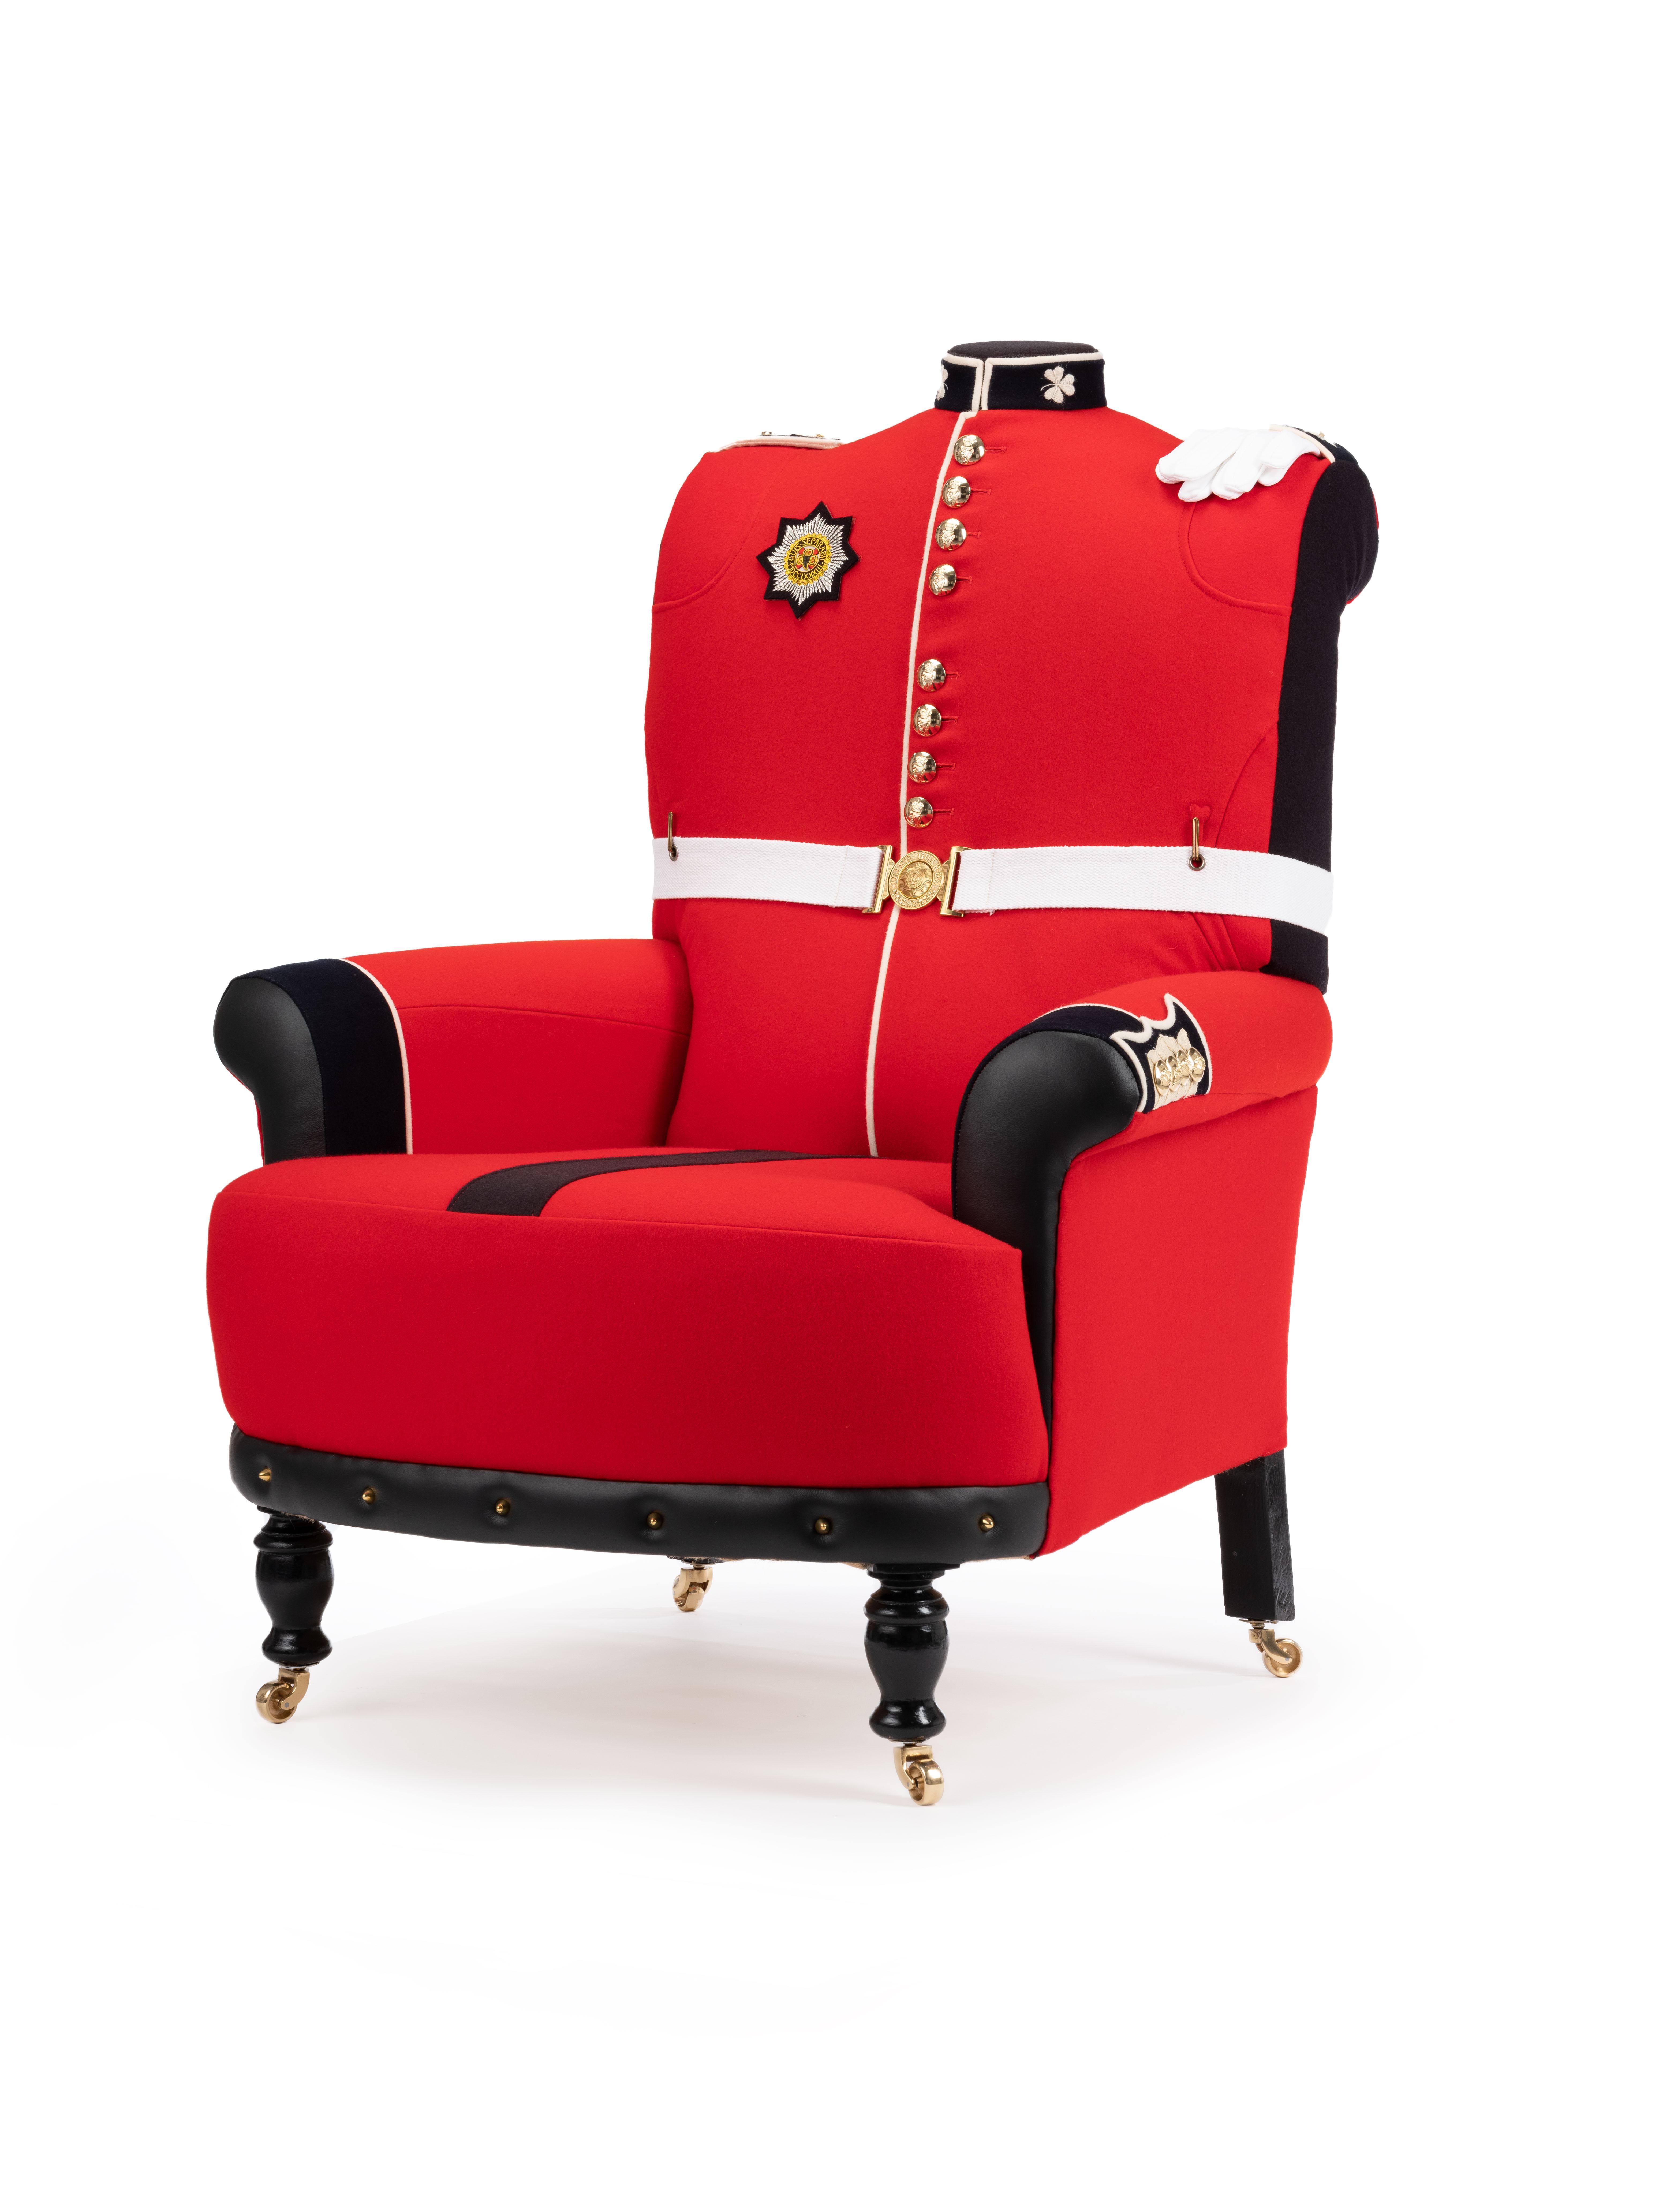 'The Irish Guards’ pair of Victorian wing back armchairs, circa 1890


‘The Irish Guards” The eclectic marriage of Victorian meets vintage military in the form of a pair of Irish guard tunic armchairs. A pair of traditionally restored Victorian